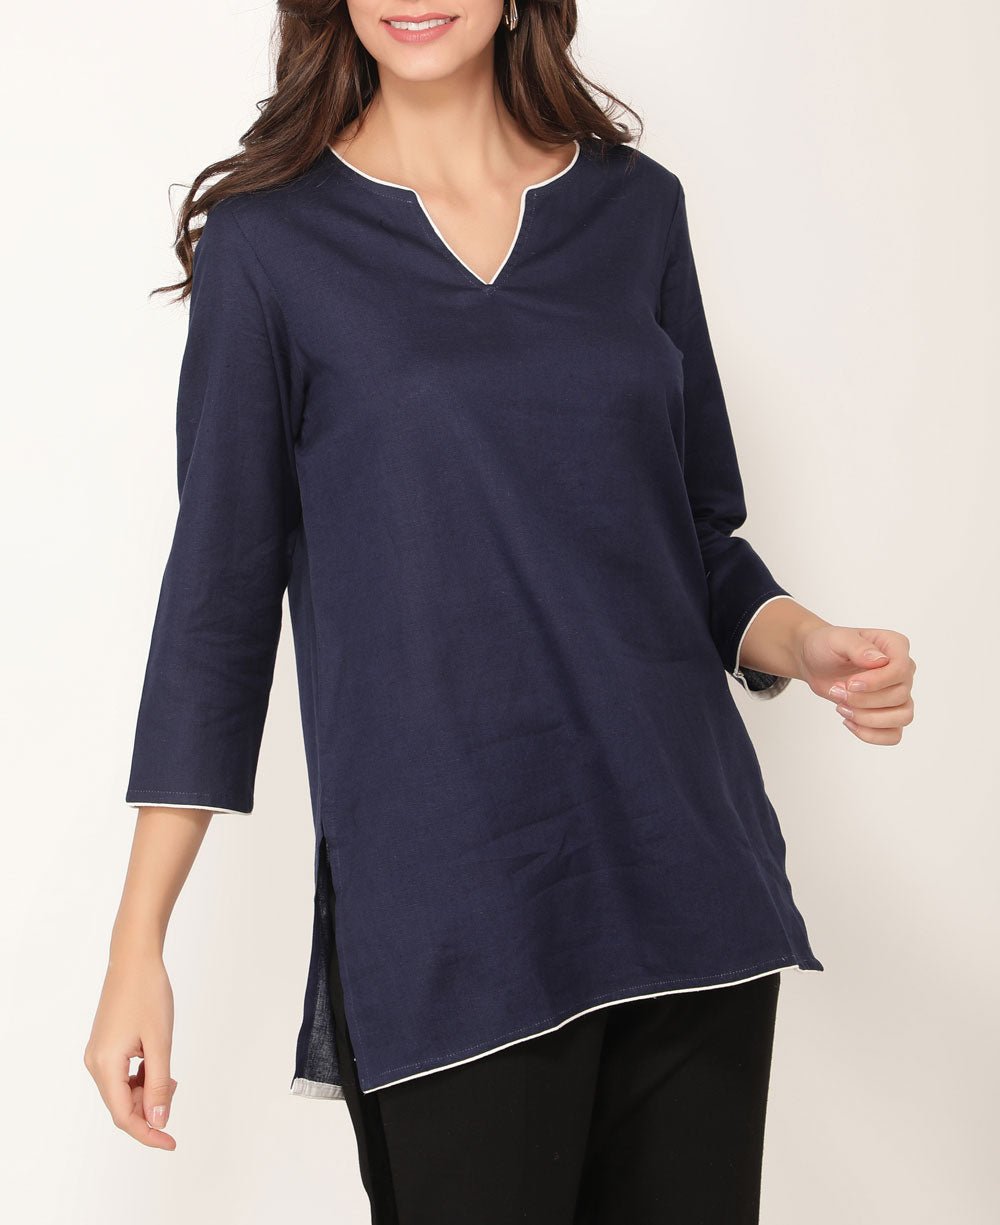 Navy Blue and White Cotton Tunic Top - Shirts & Tops S